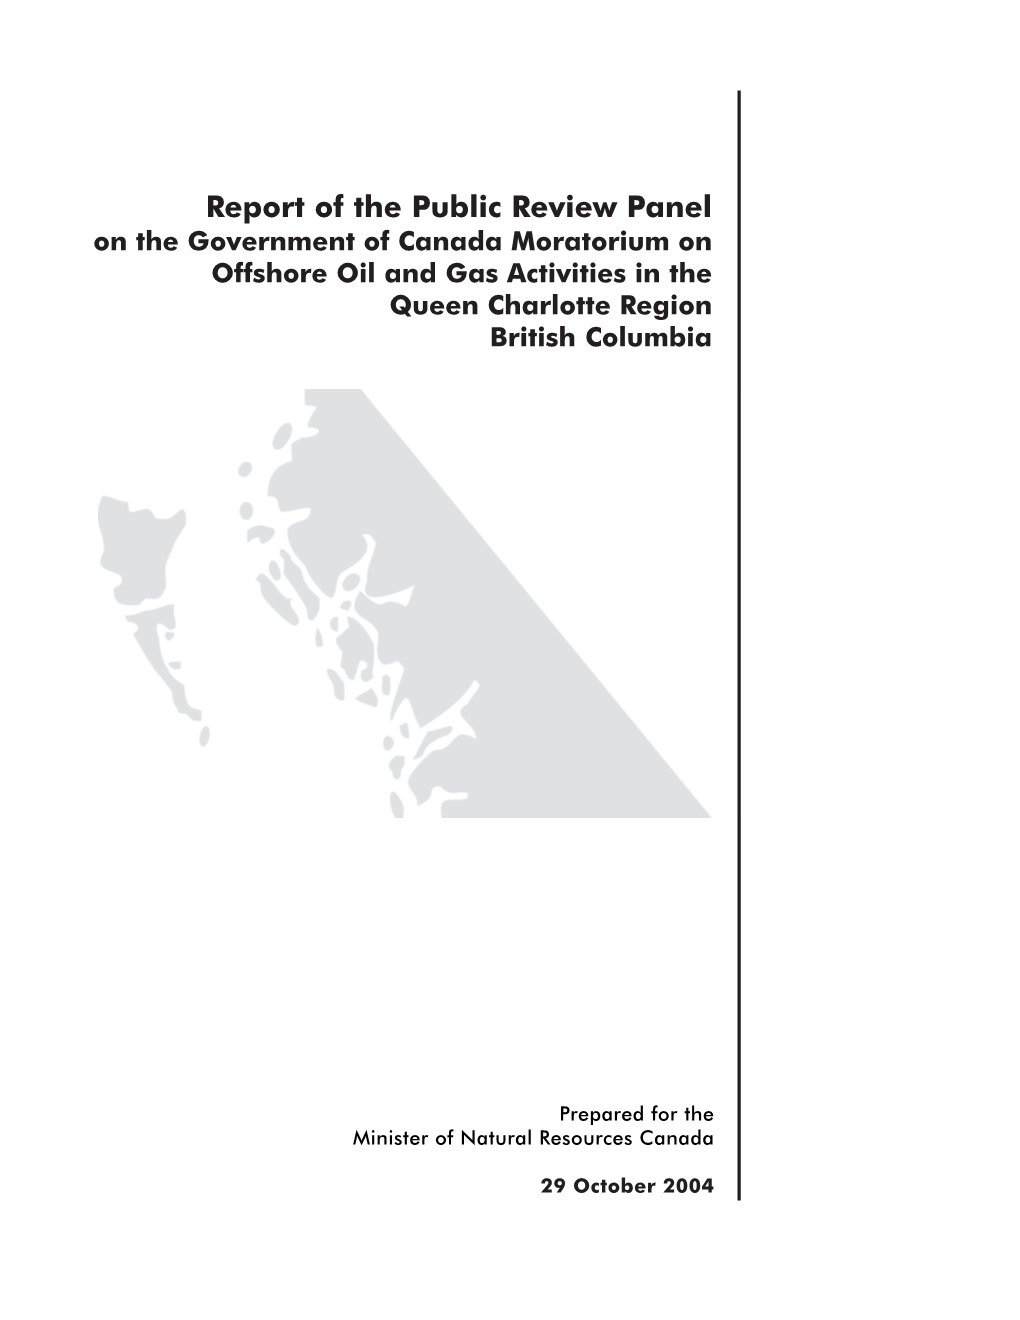 On the Government of Canada Moratorium on Offshore Oil and Gas Activities in the Queen Charlotte Region British Columbia